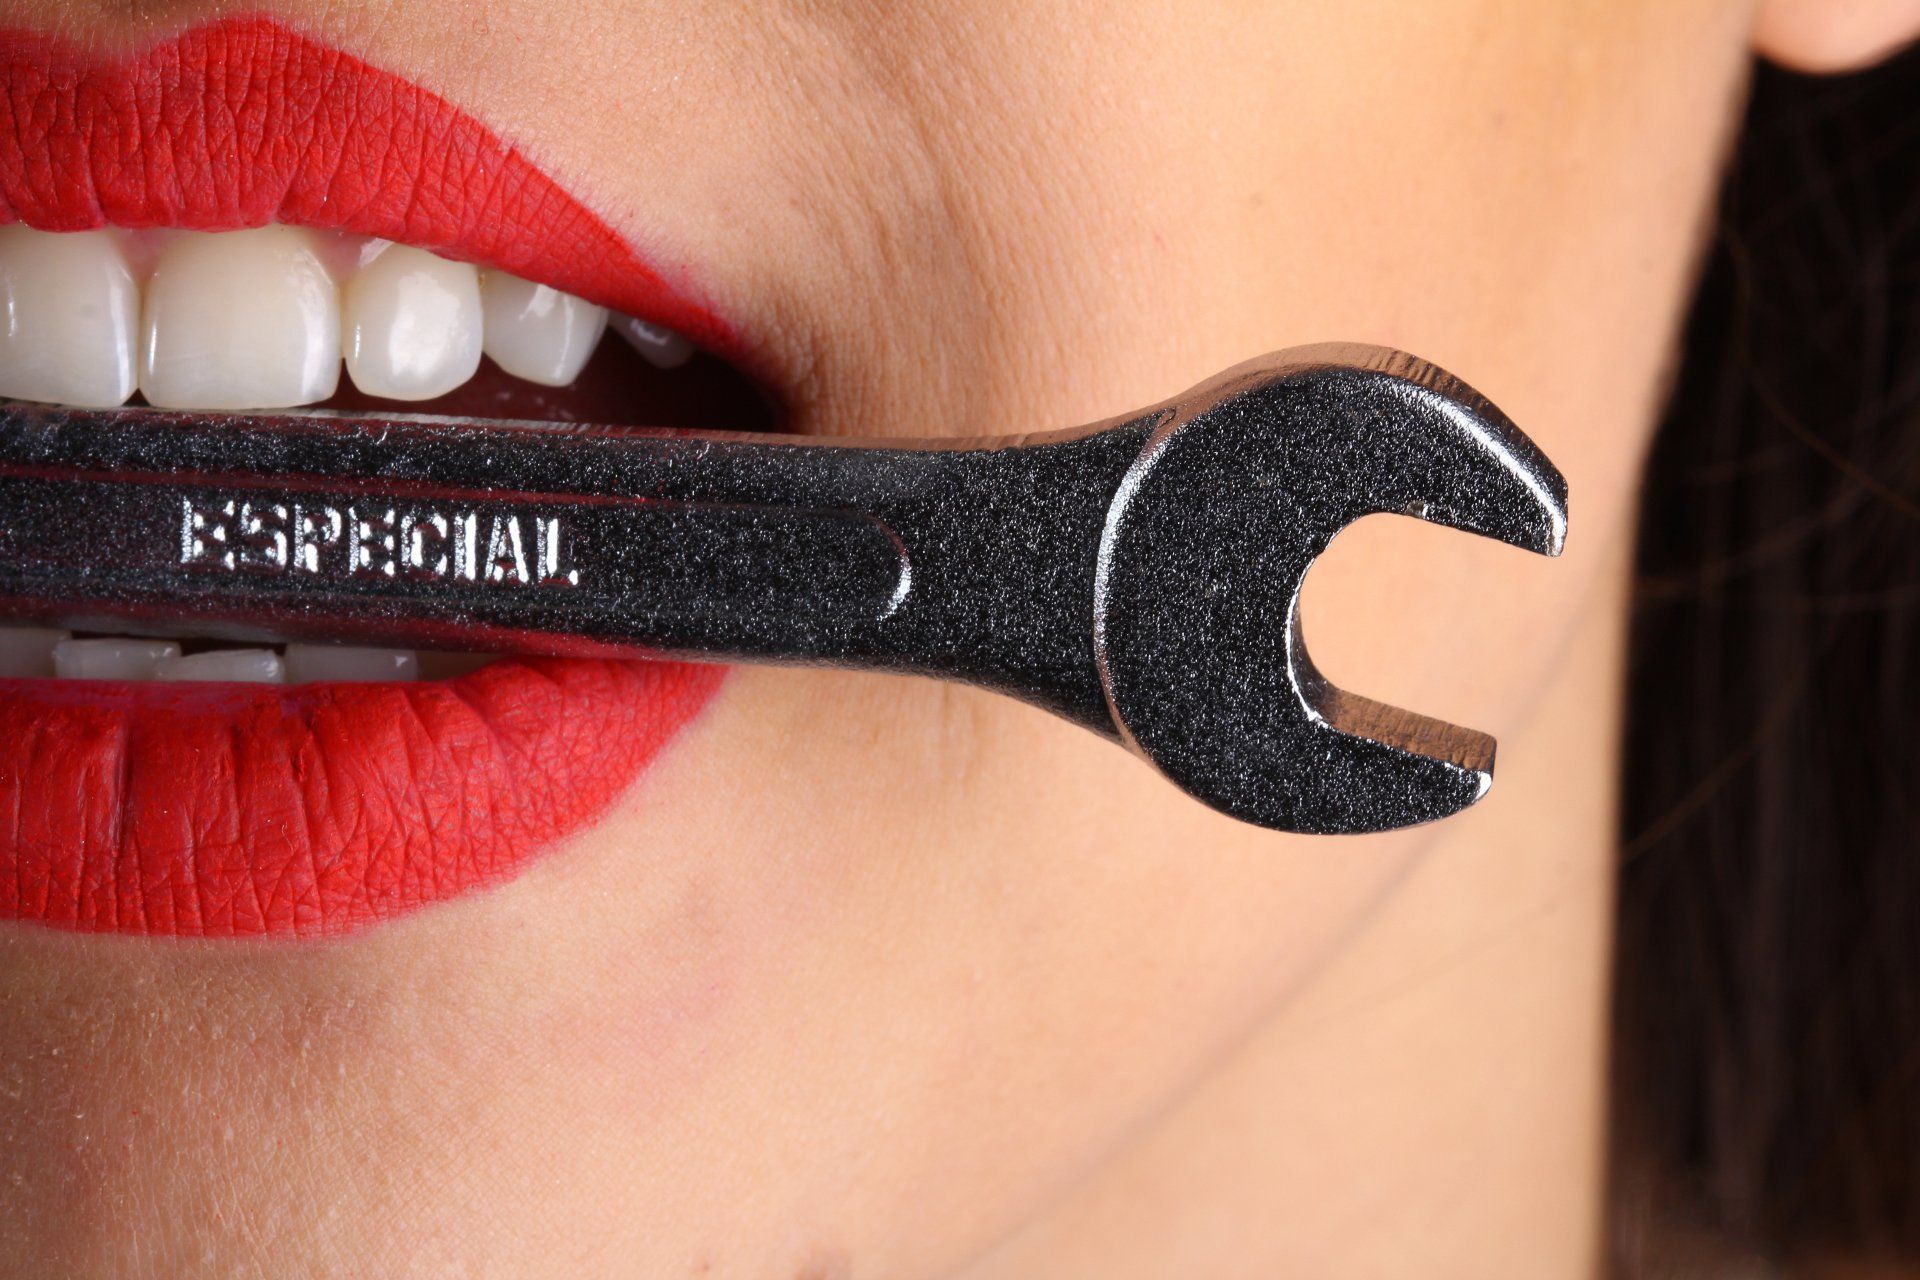 woman's face with red lipstick and a wrench in her mouth